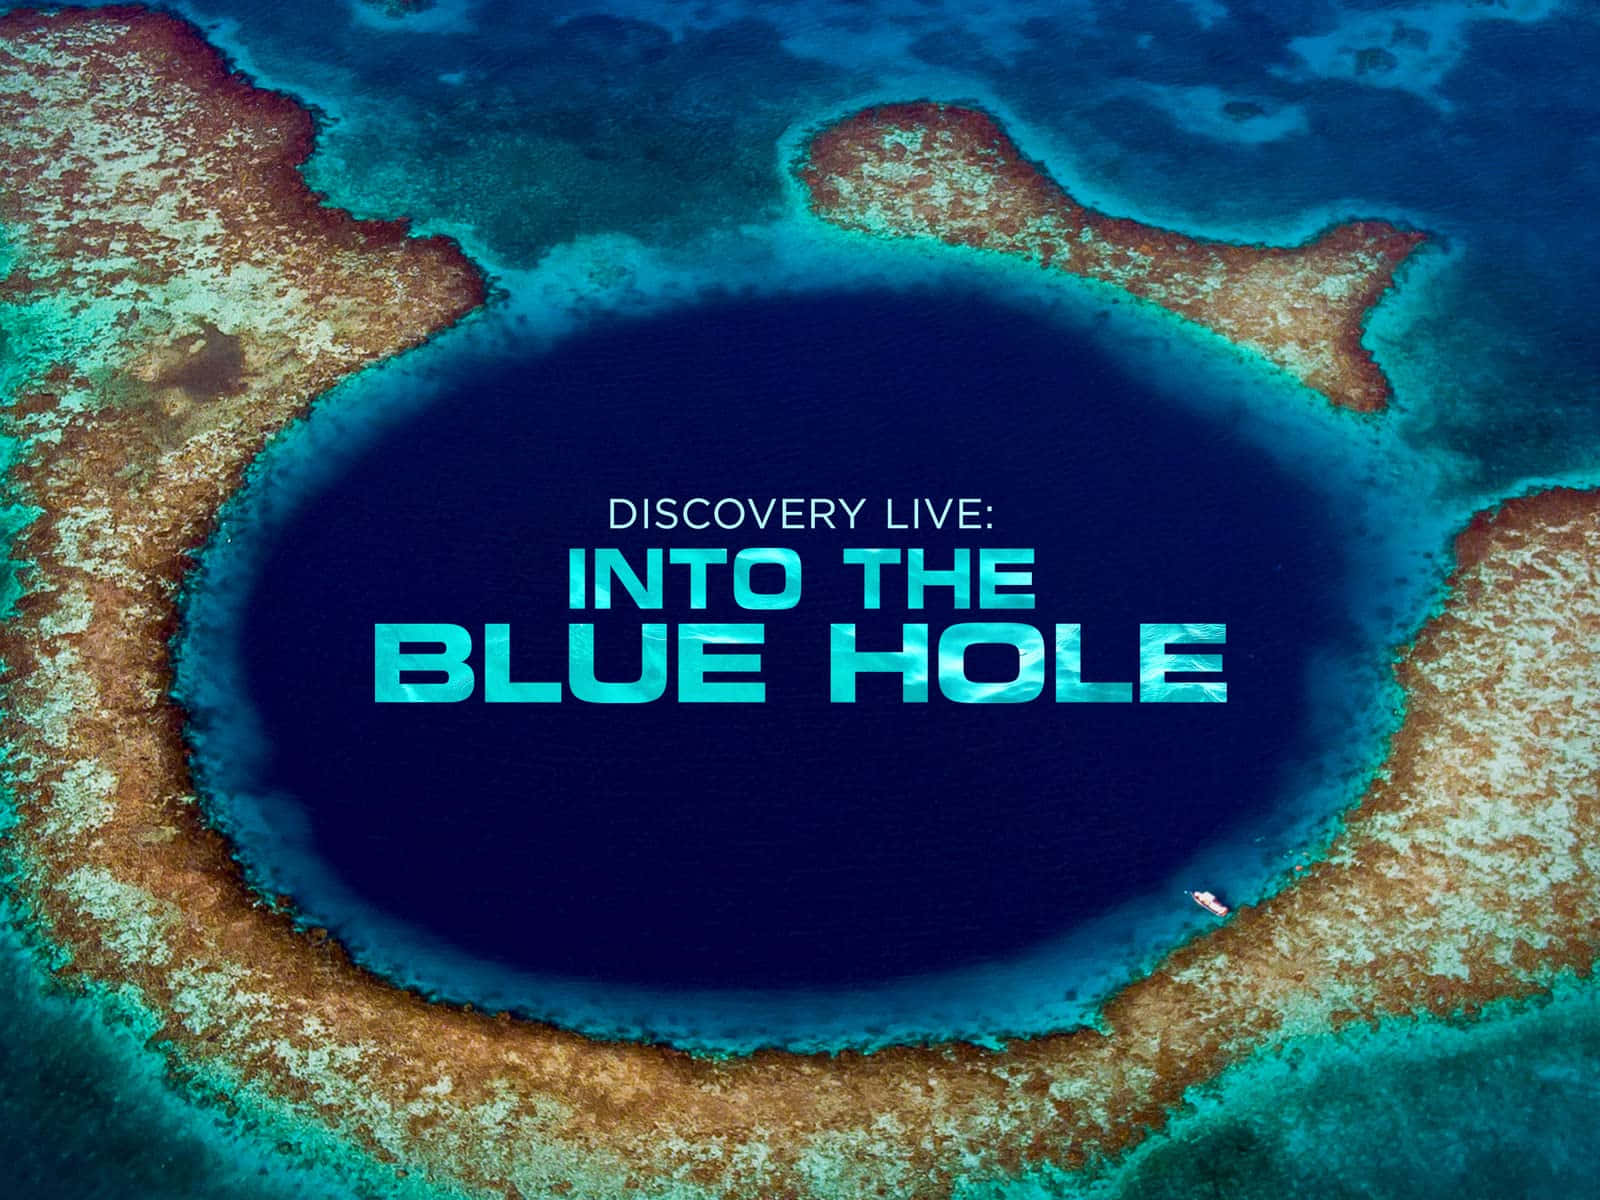 Download Great Blue Hole Discovery Live Wallpaper 